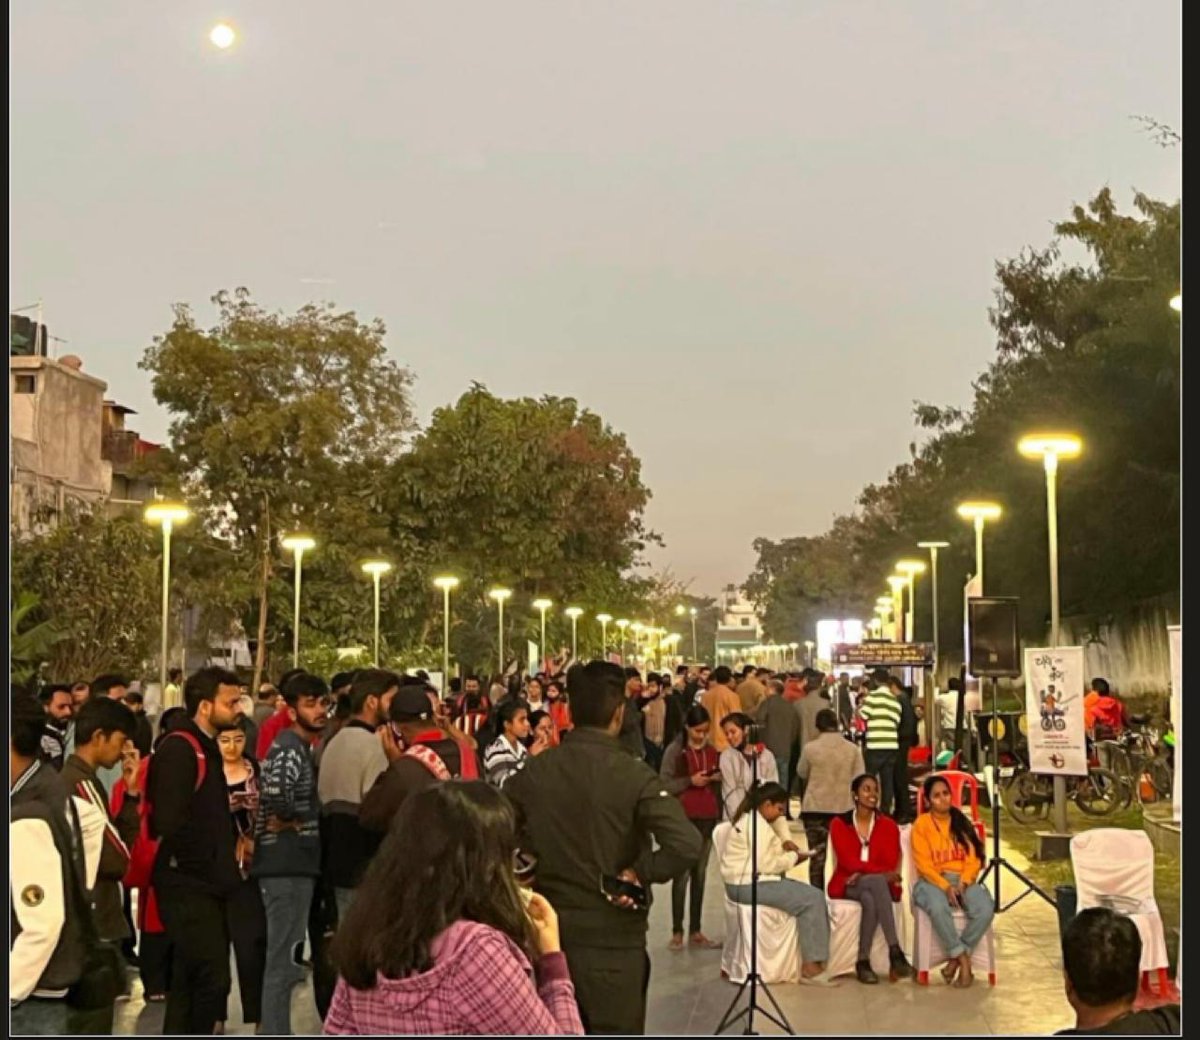 In a world of chaos, Chaikumbh offers a serene sanctuary where chai reigns supreme. Come, let's sip, share, and savor the moments together.'
#Chaikumbh